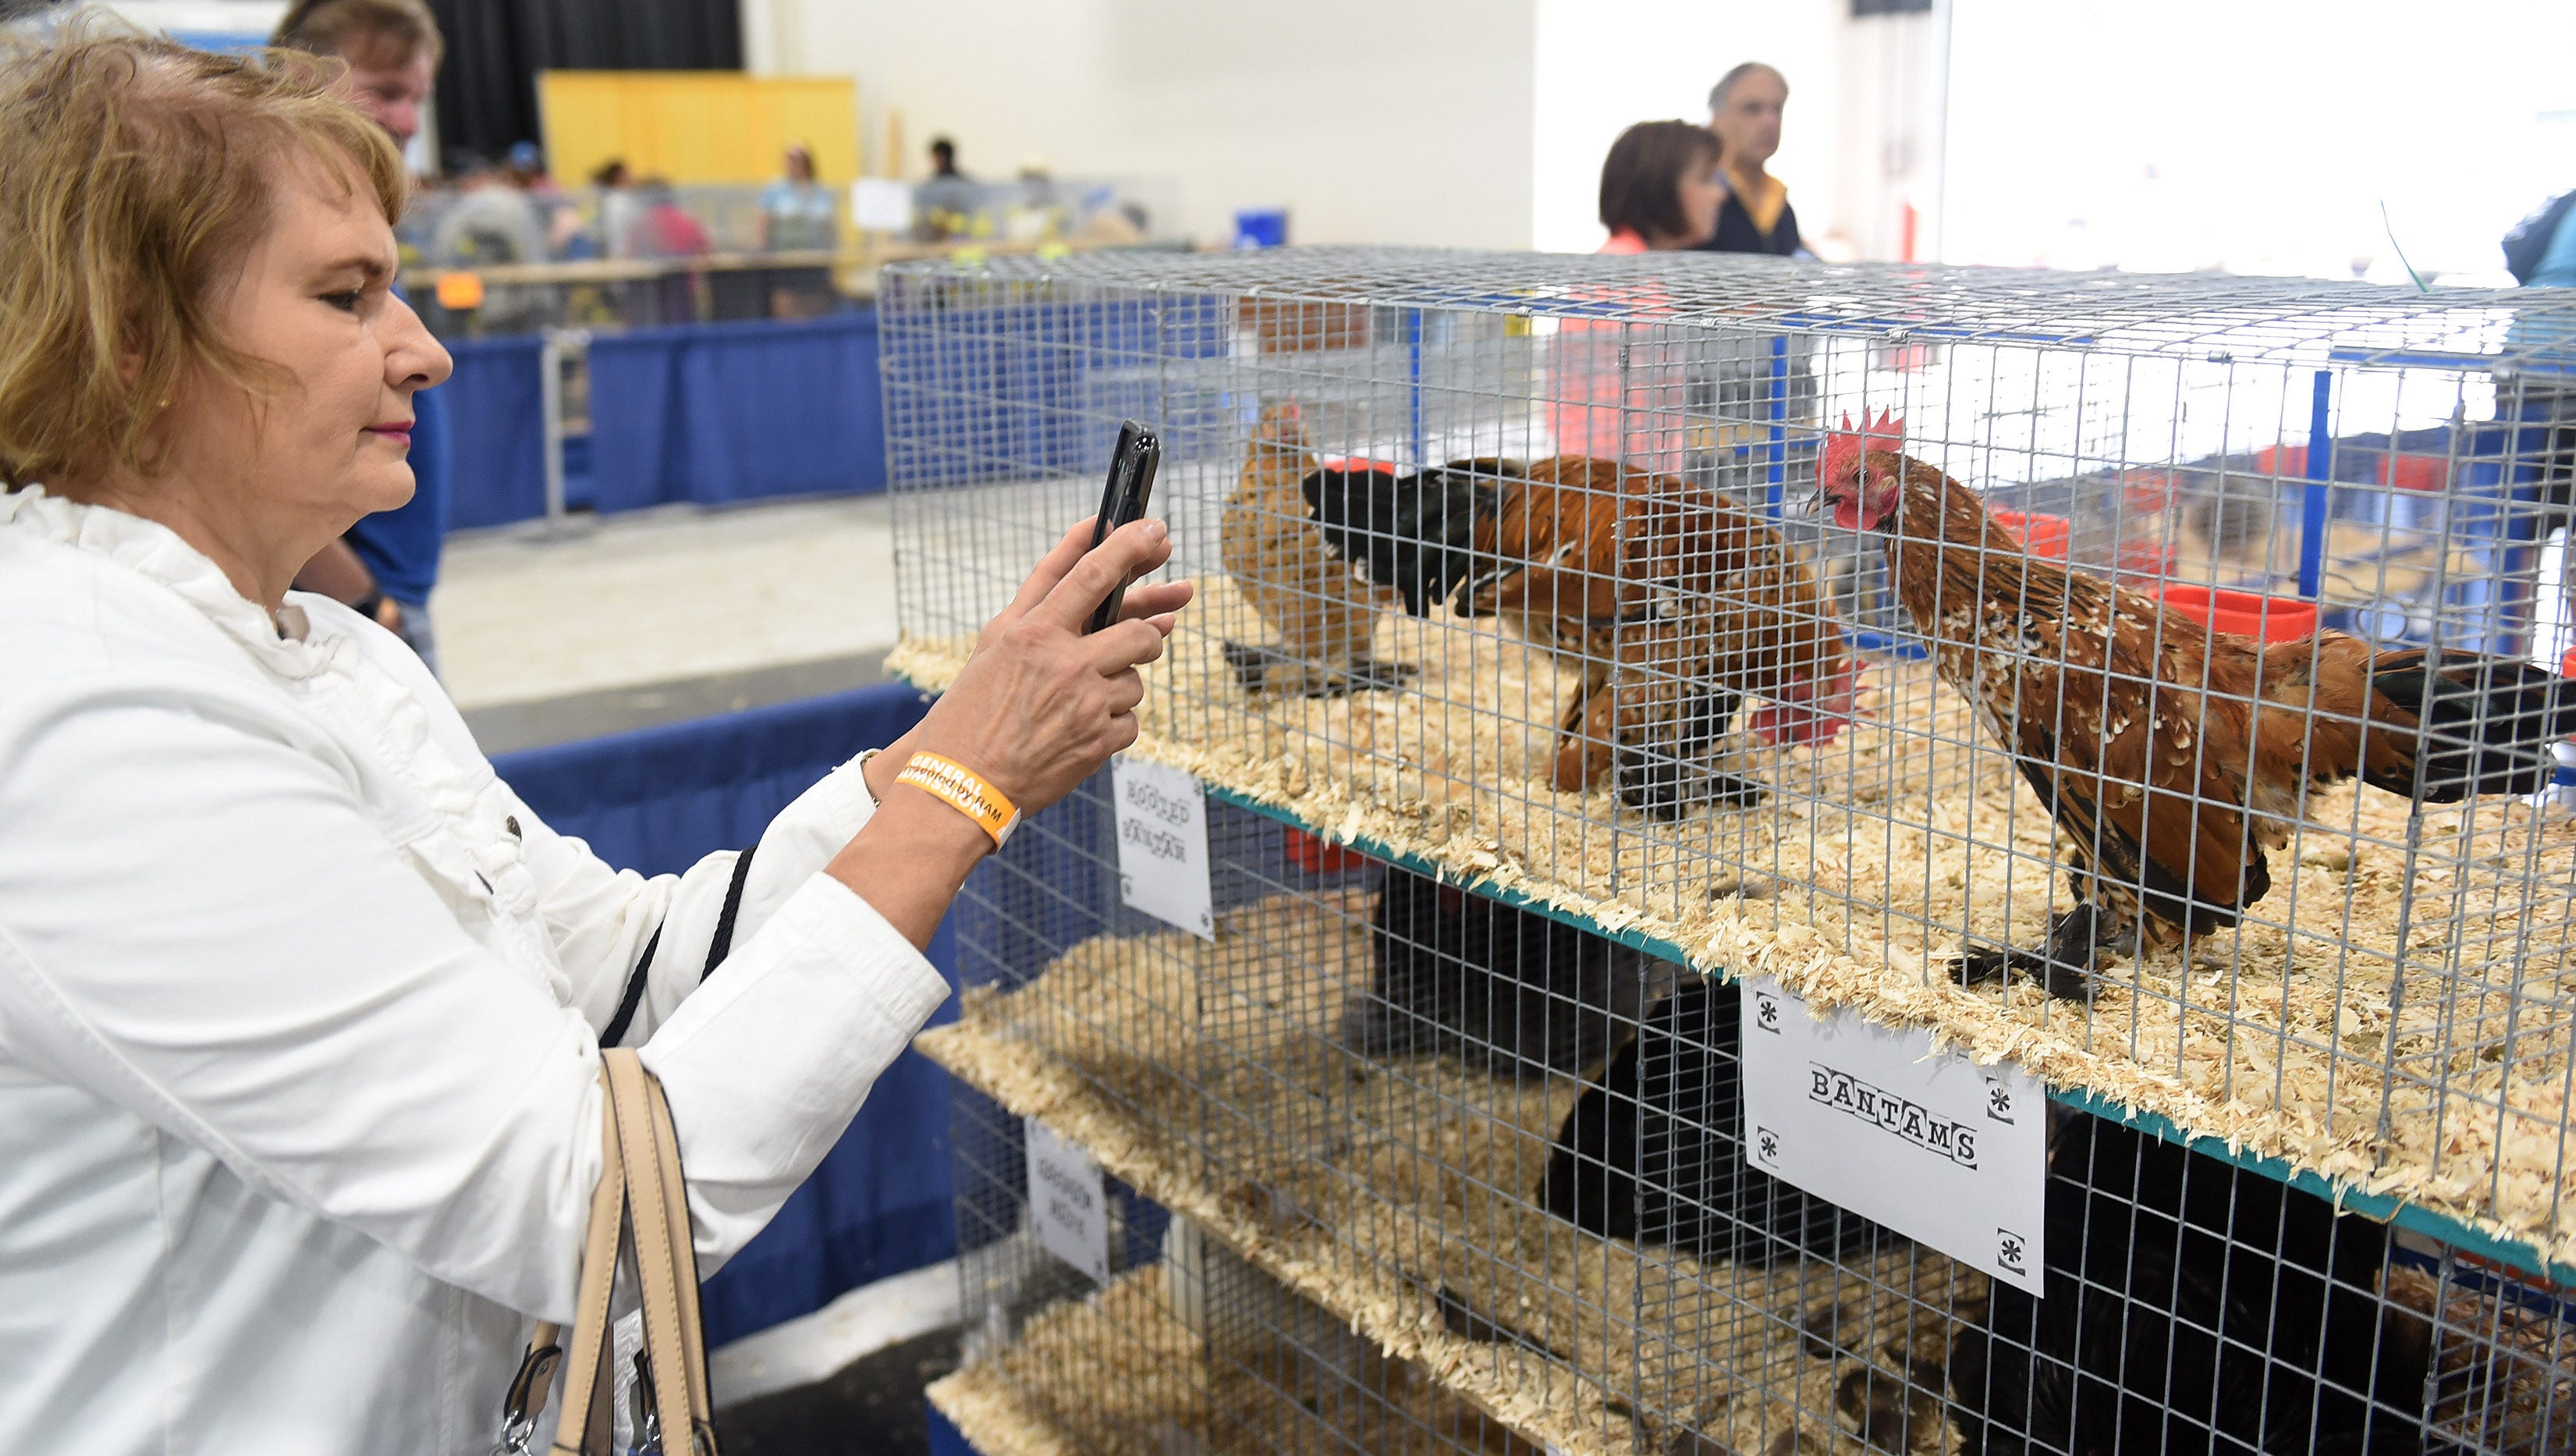 Judie DeCia of Howell takes photos of the Bantam chickens at the Michigan State Fair.